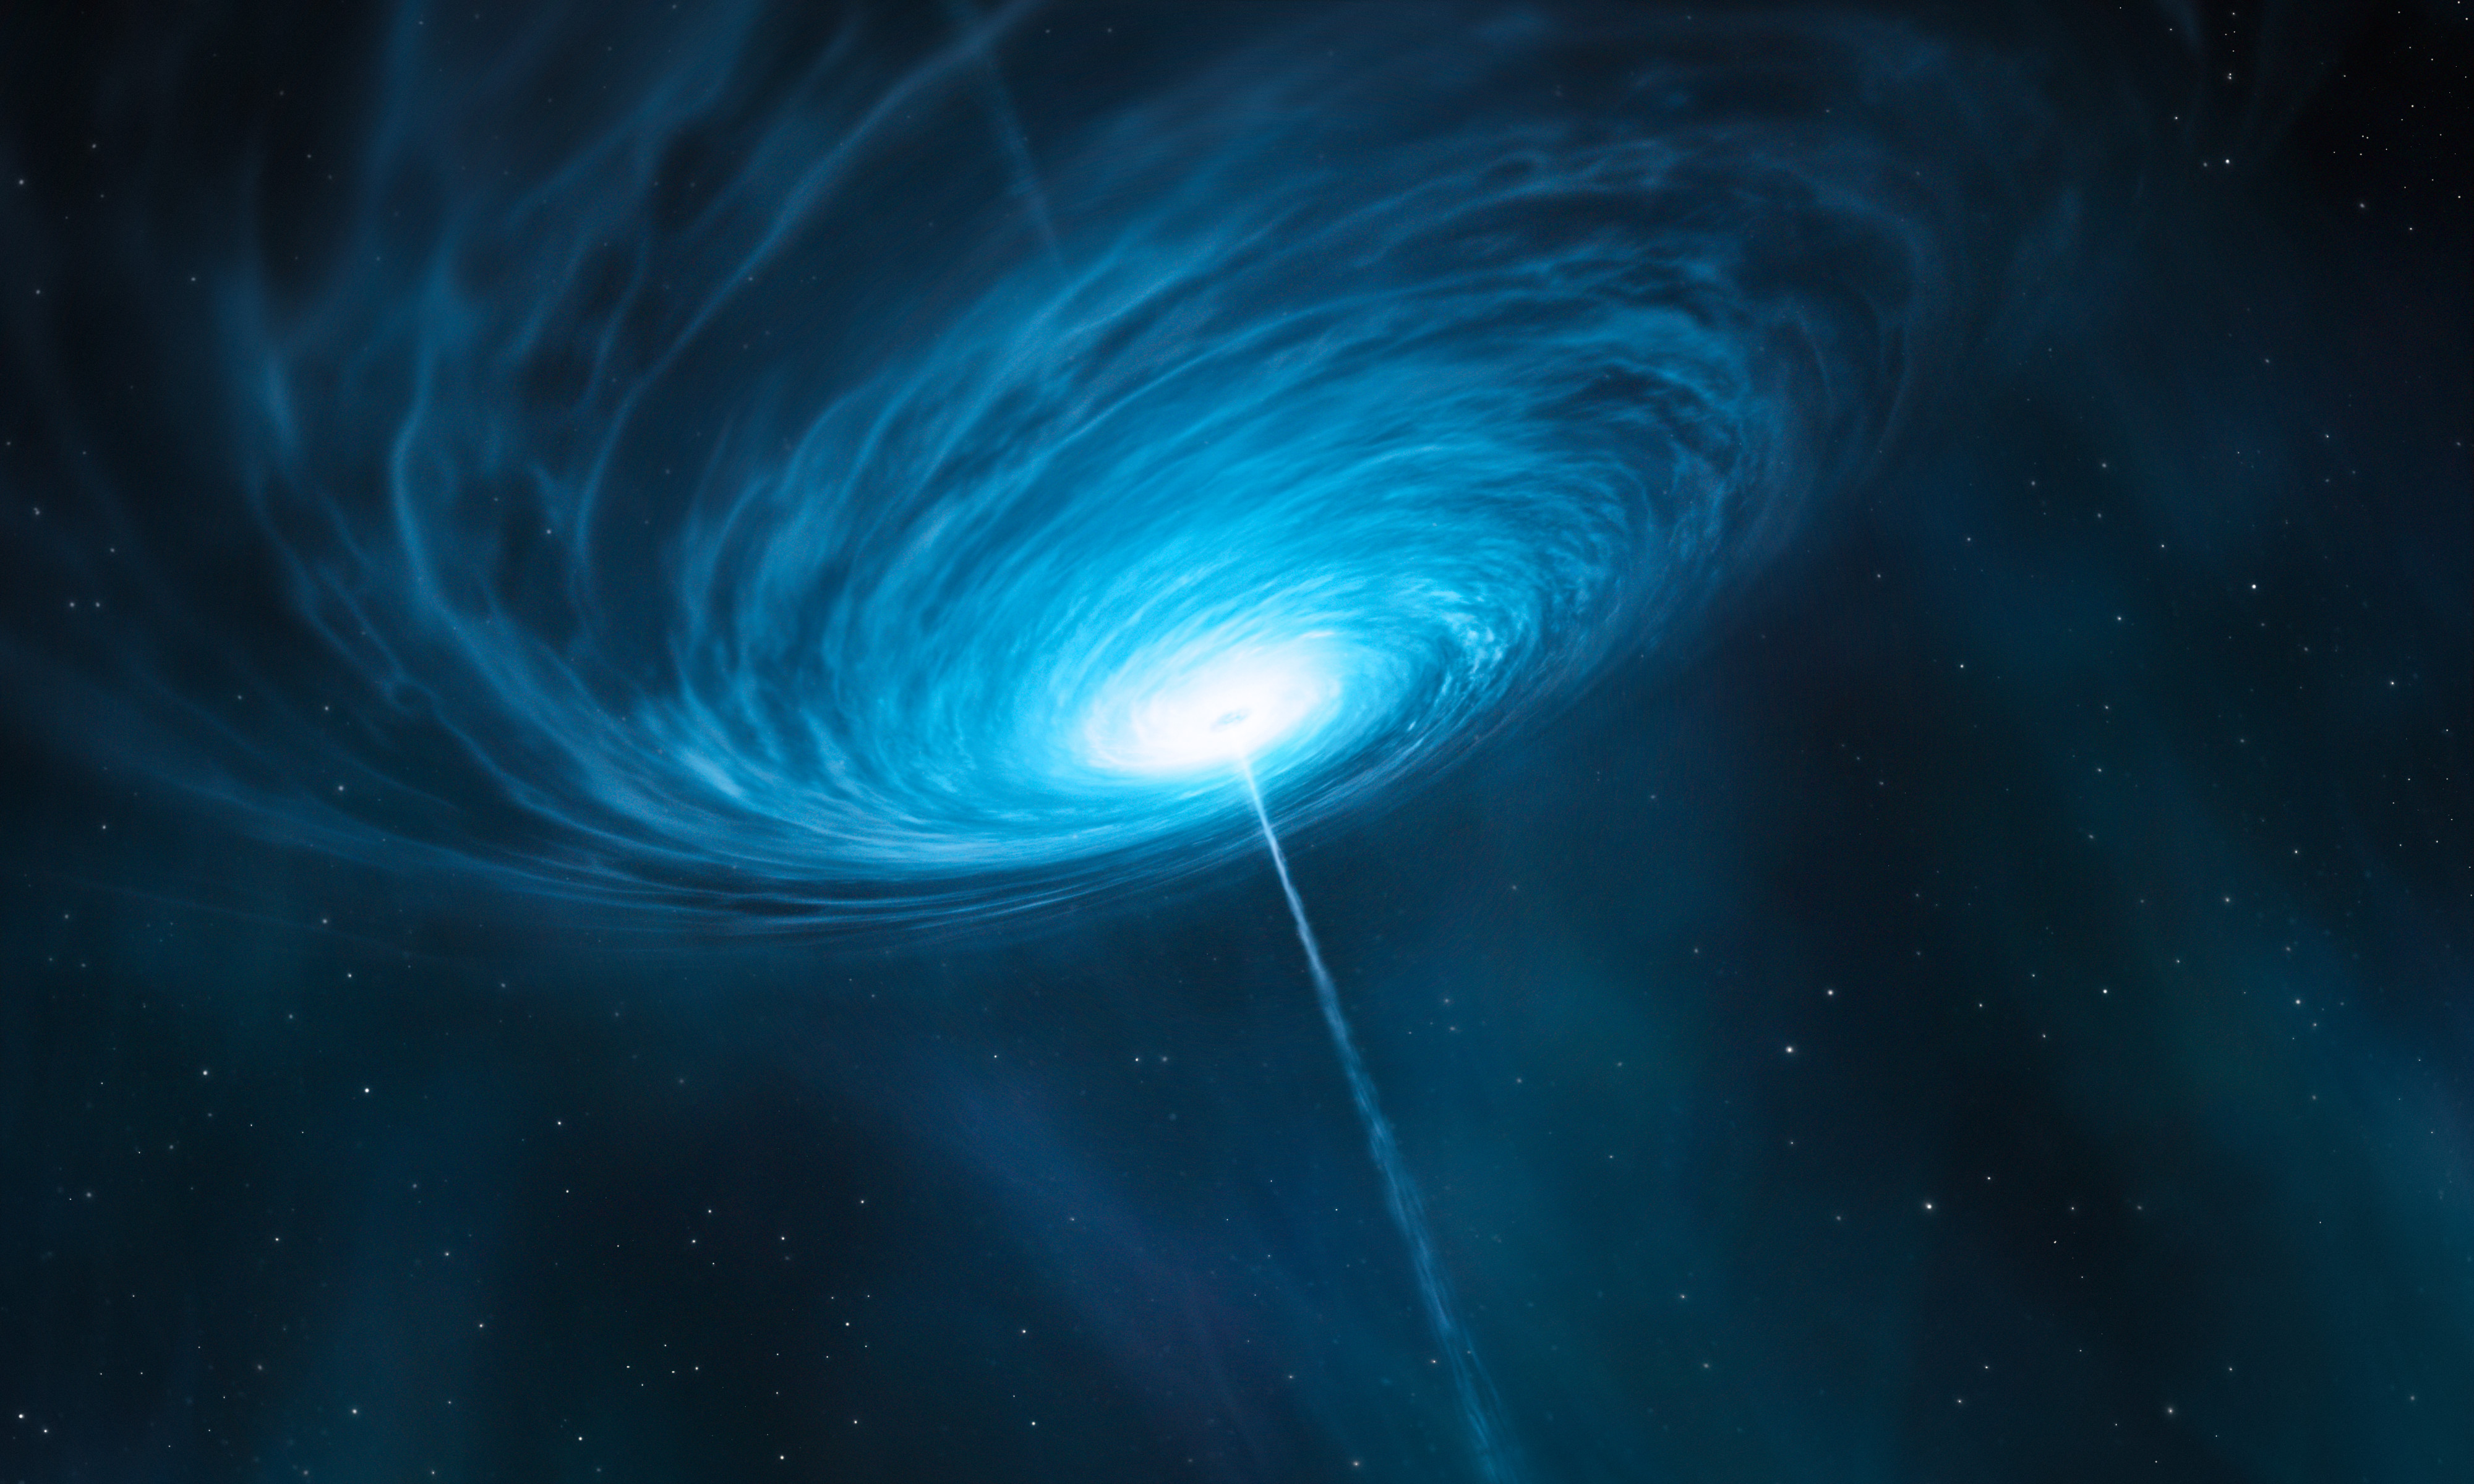 Artist’s impression of the quasar 3C 279 by ESO